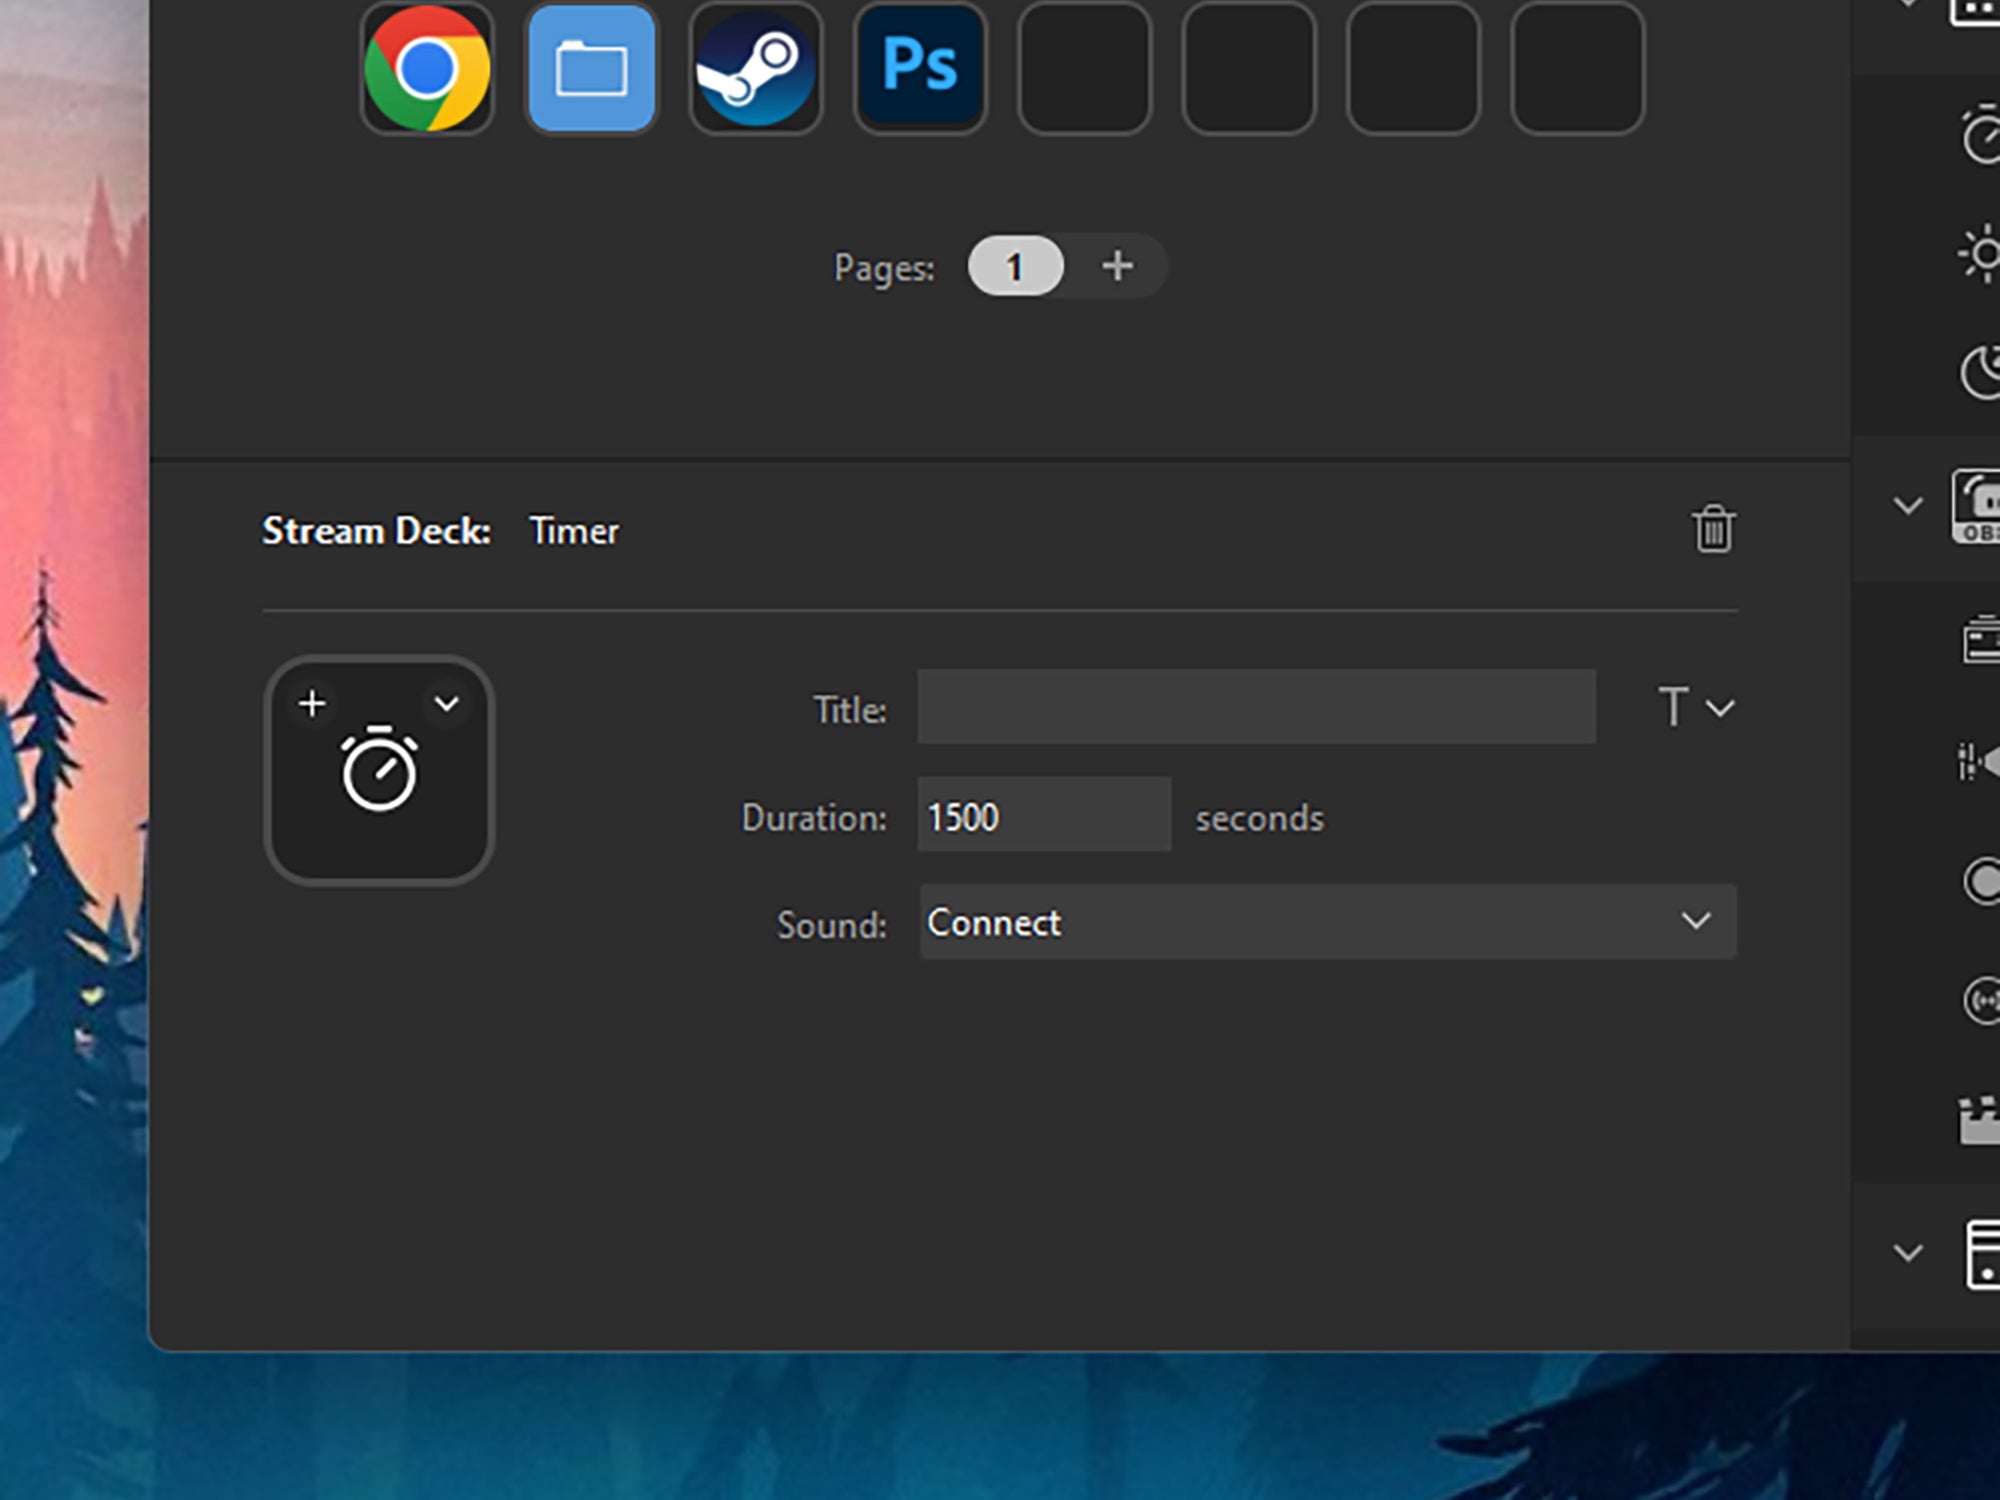 The timer tool for the Elgato Stream Deck.